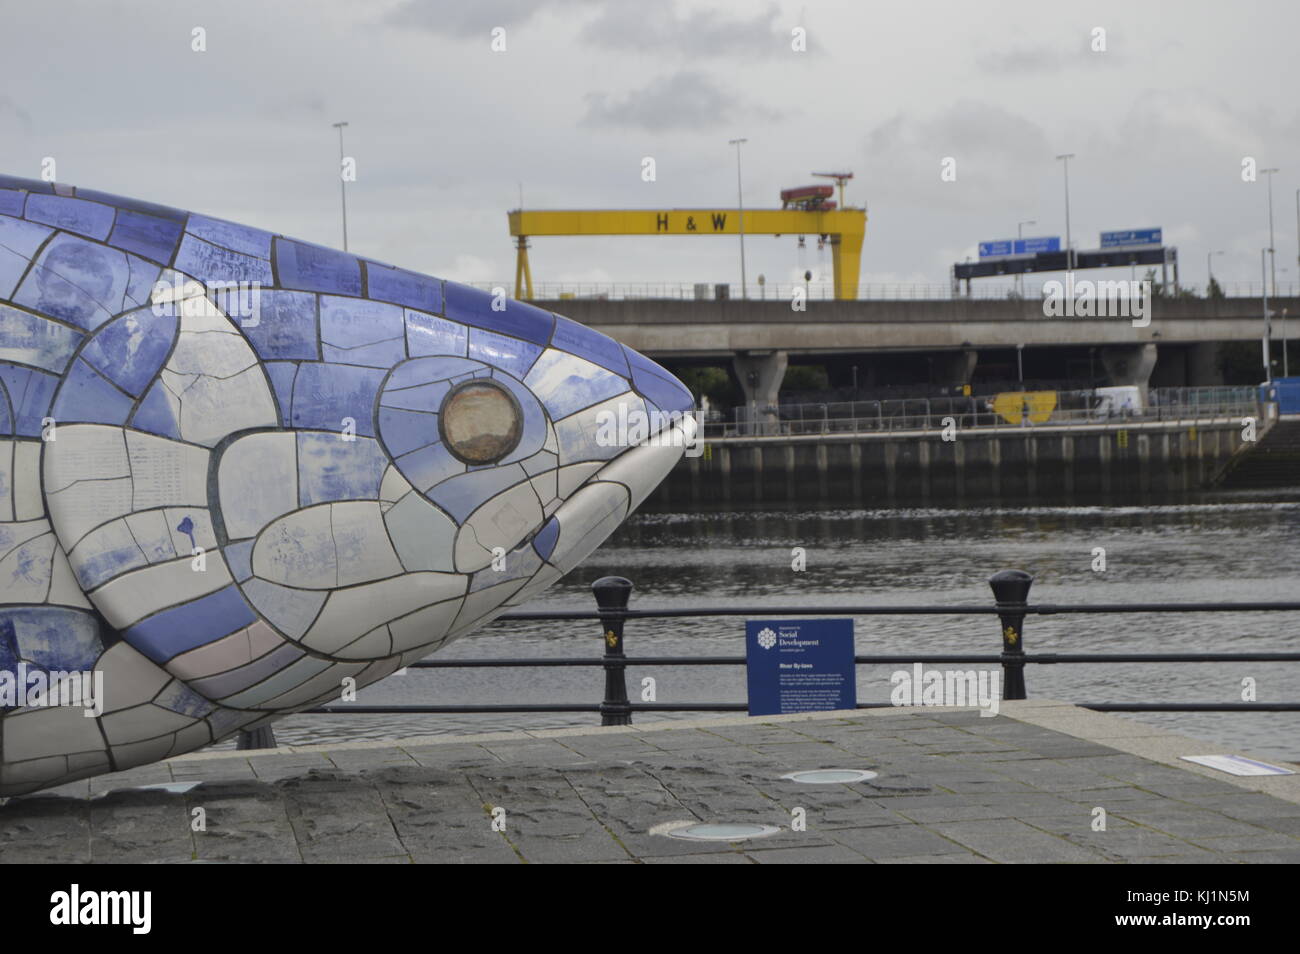 The Big Fish is a printed ceramic mosaic sculpture by John Kindness in Belfast, Northern Ireland. Stock Photo